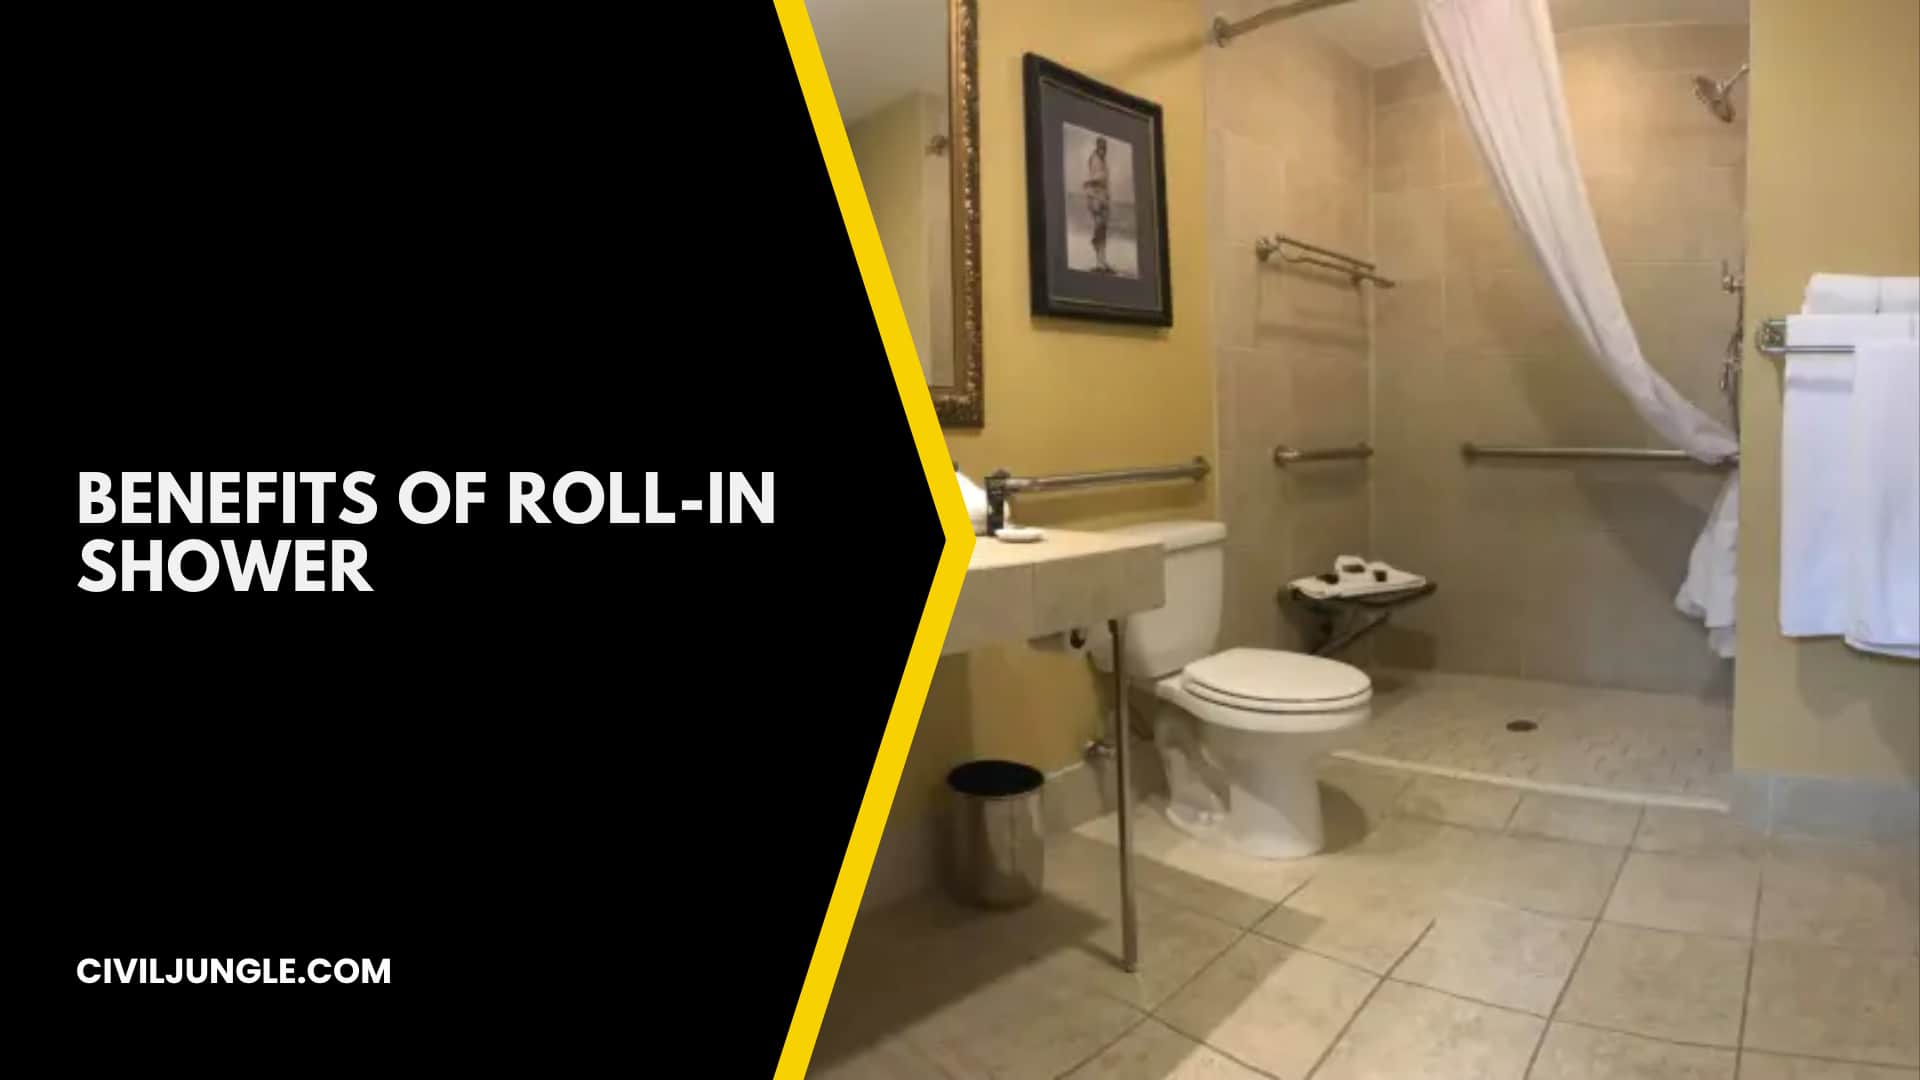 Benefits of Roll-in Shower